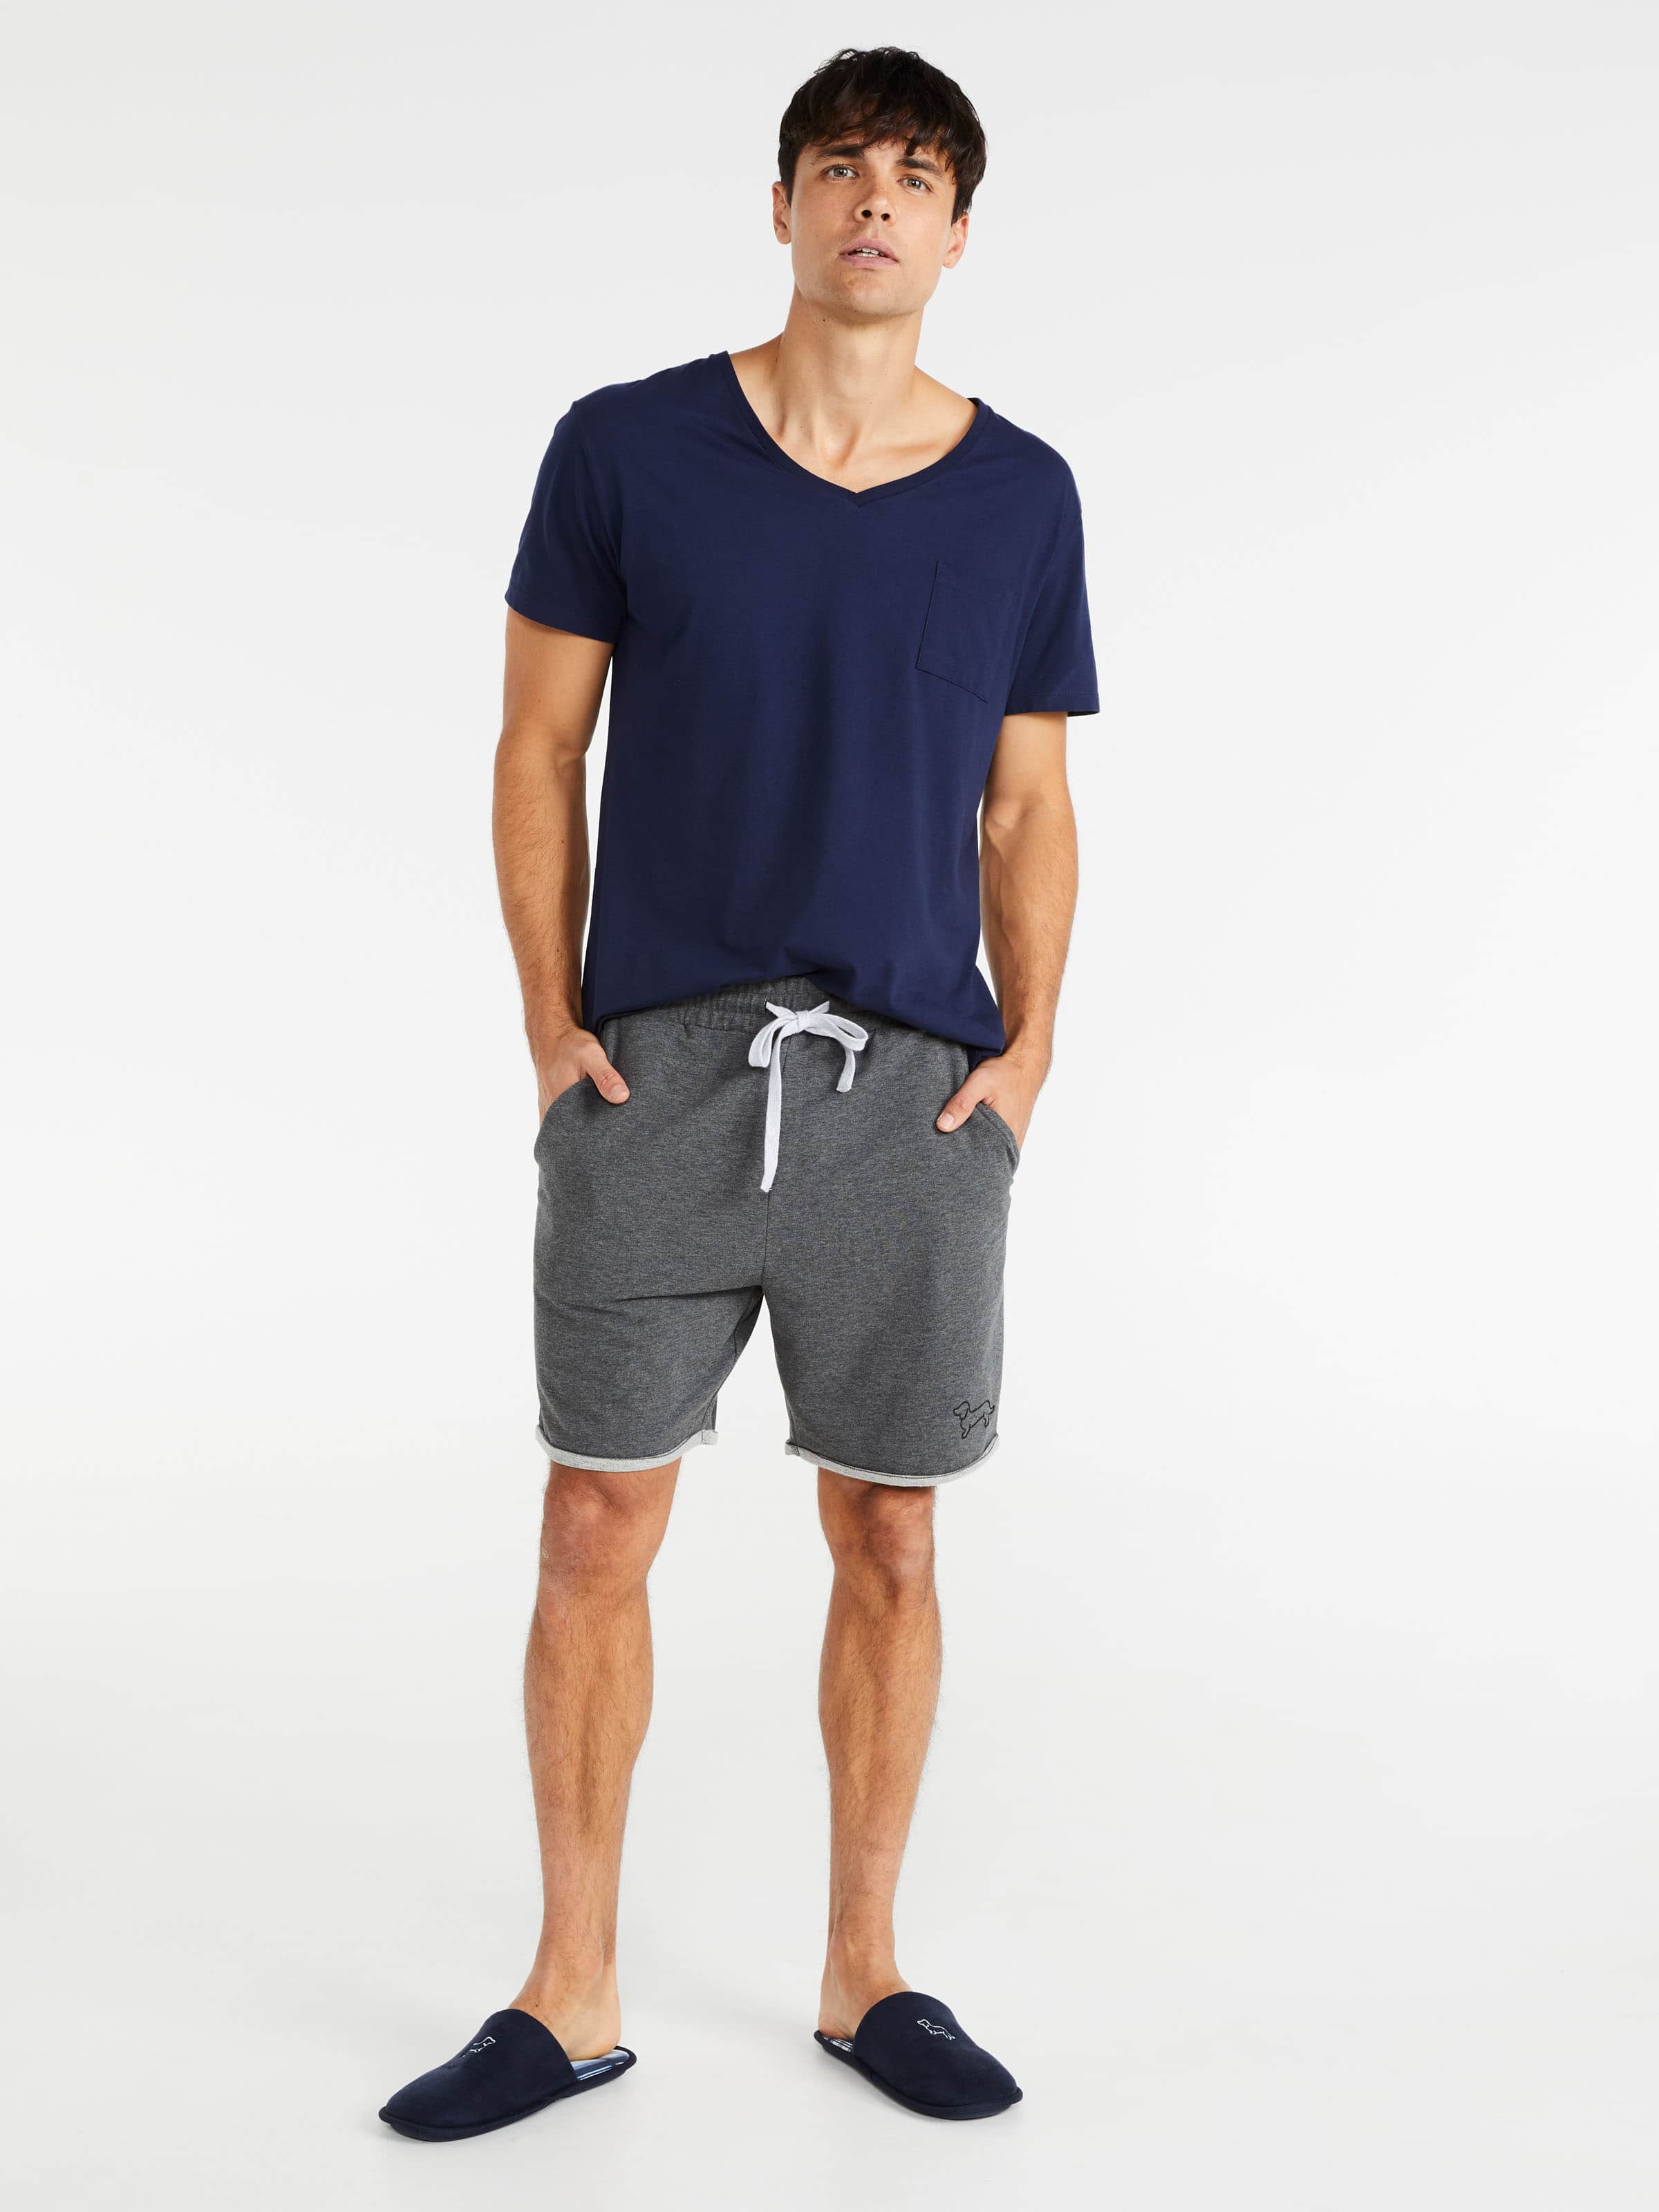 P.A. Charcoal Cut Off Sweat Charcoal Marle - Peter Alexander Online